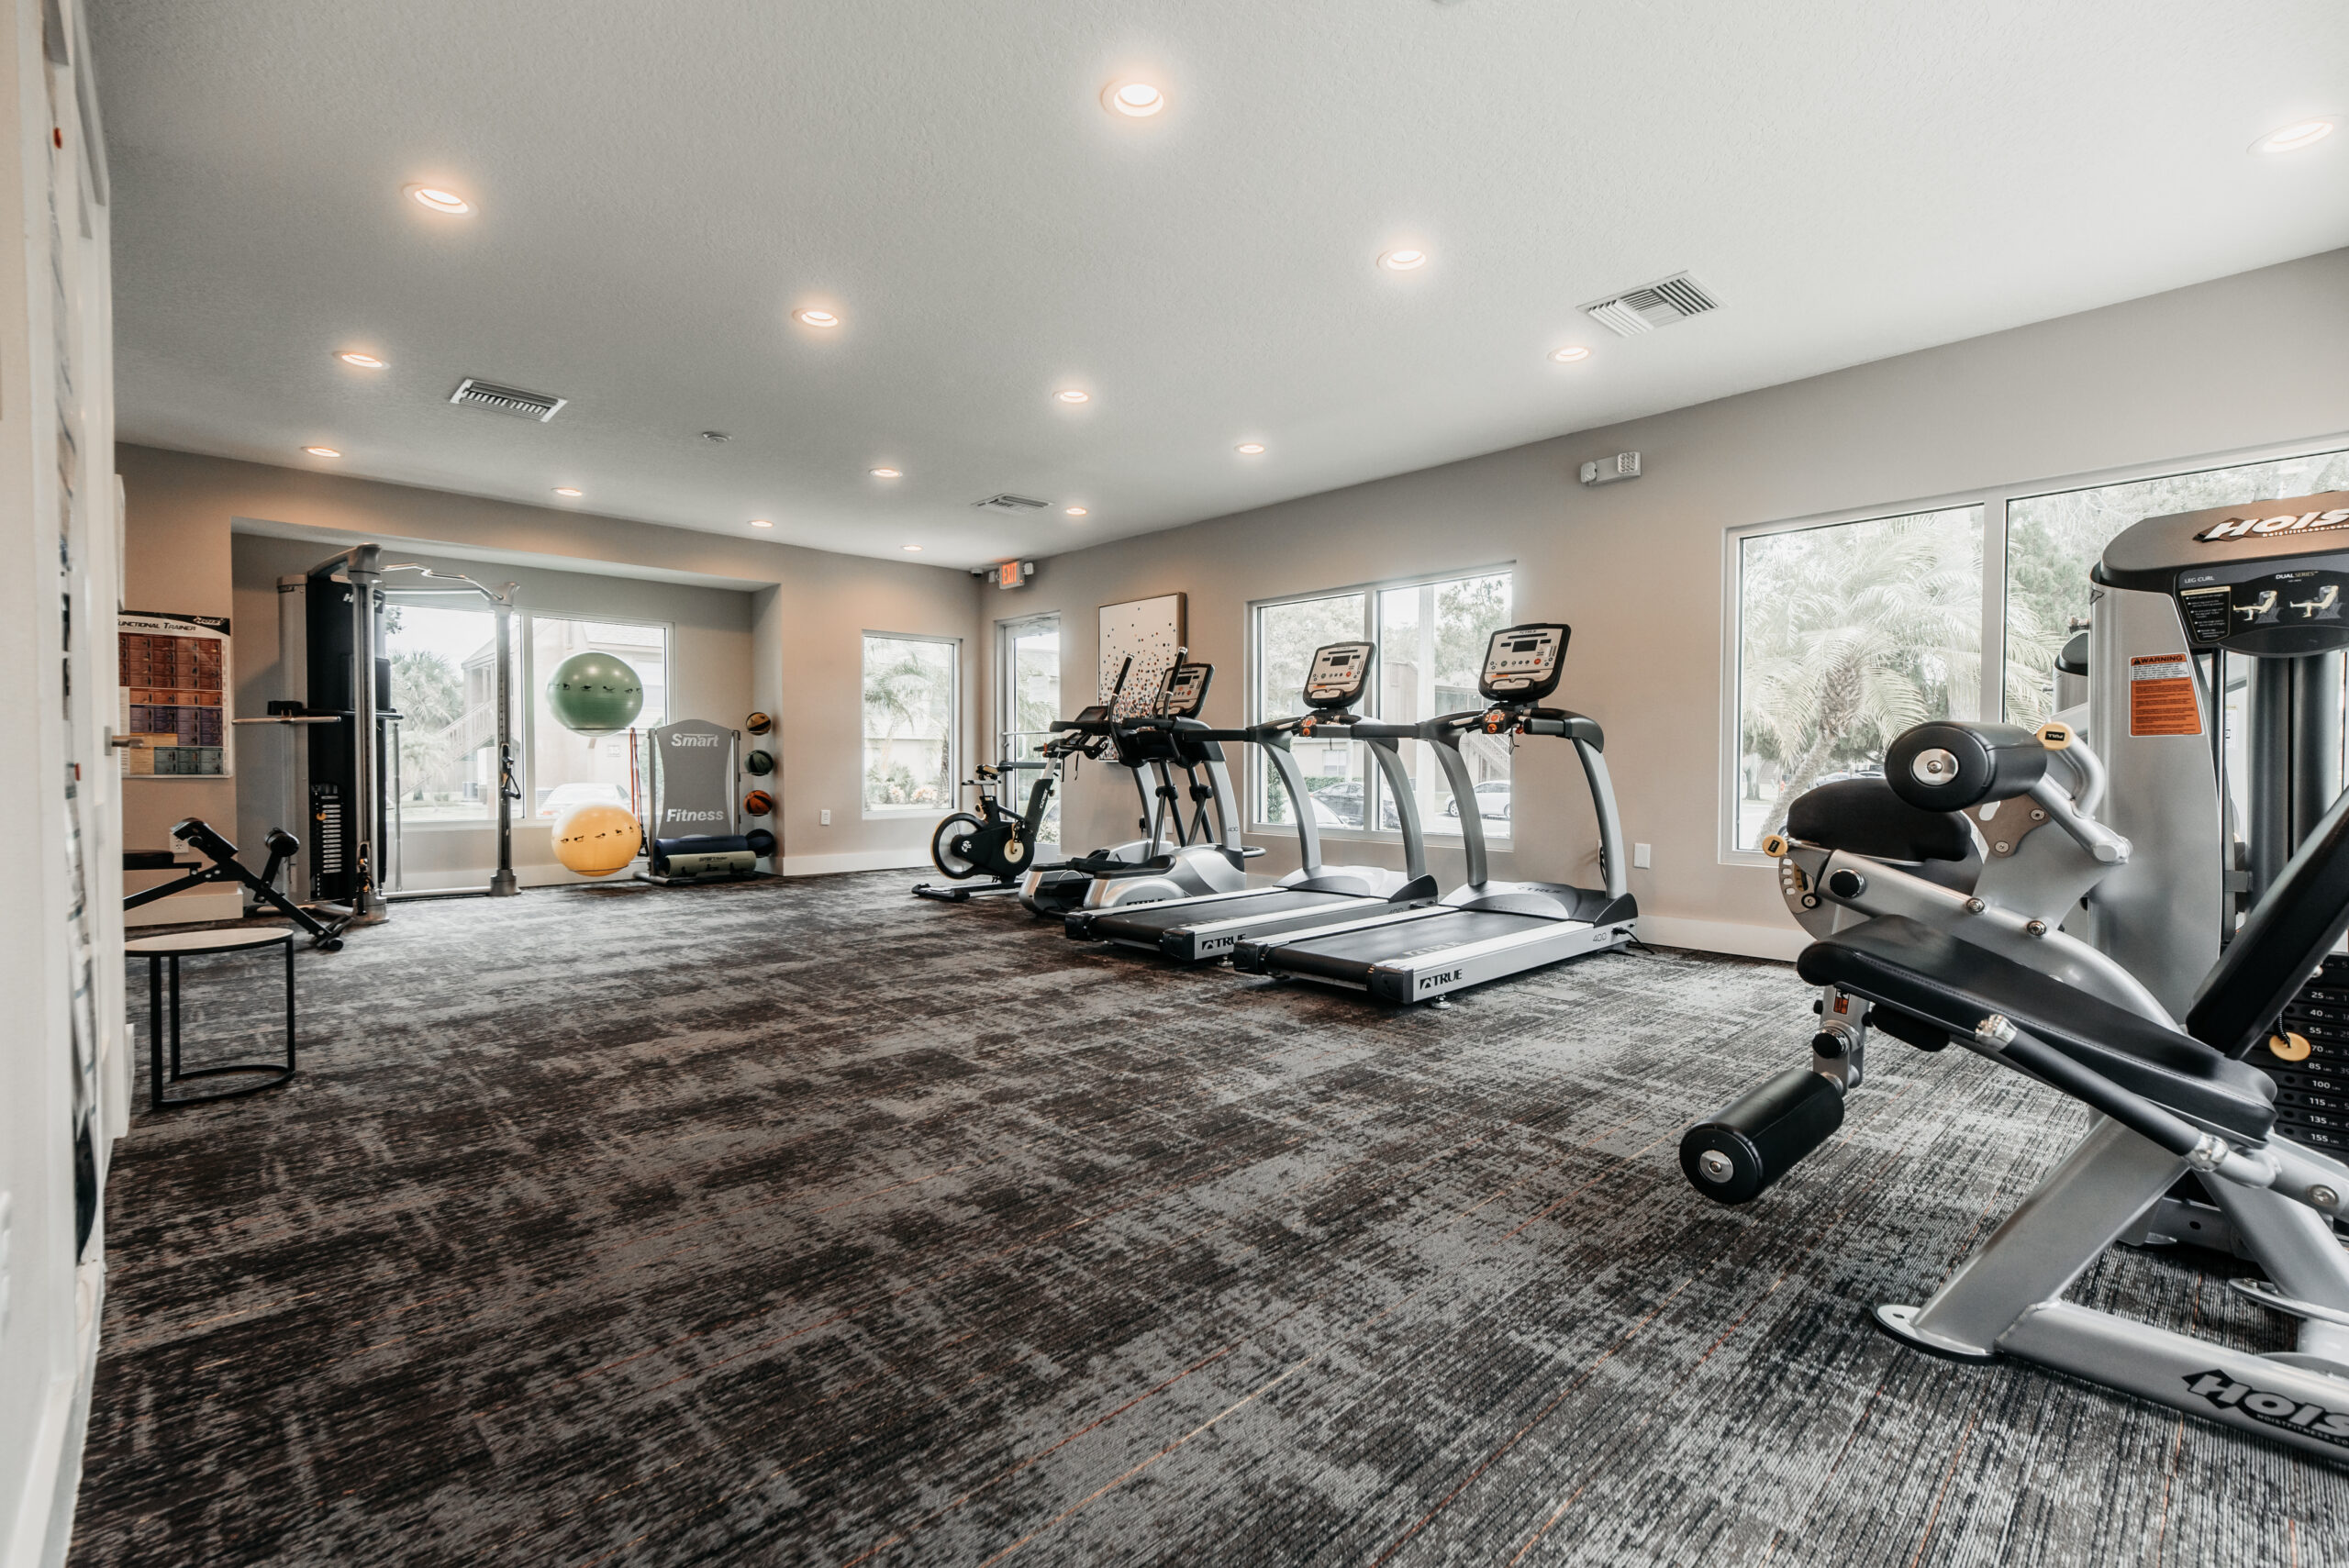 Exercise room with medicine balls, standing bike, elliptical, two treadmills and weightlifting equipment